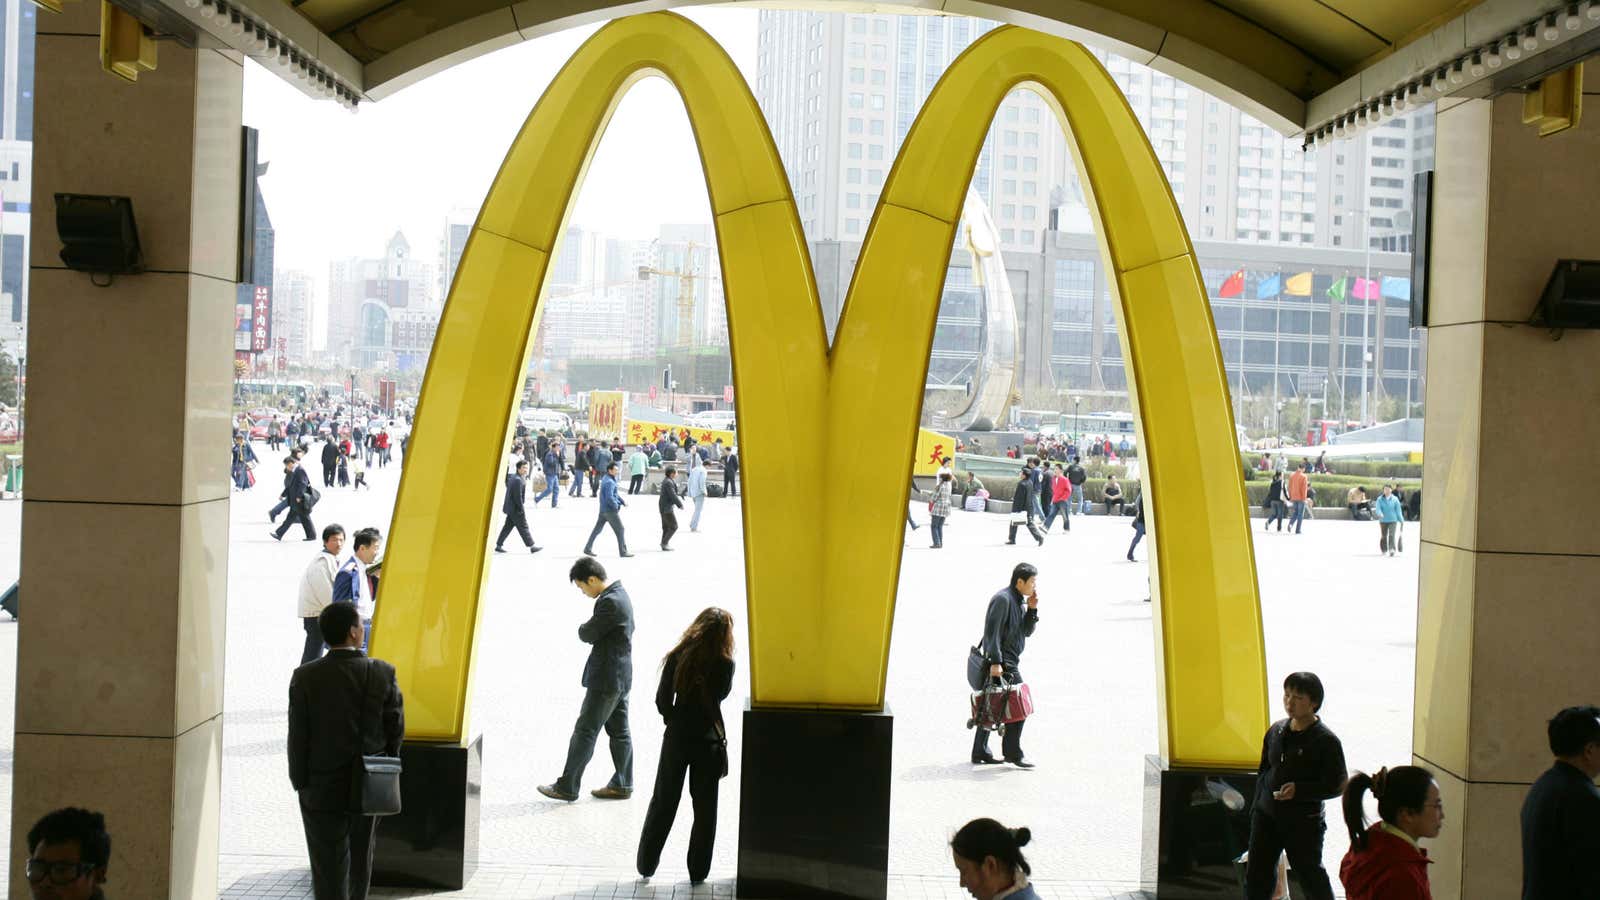 McDonald’s plans to open as many as 250 restaurants this year.